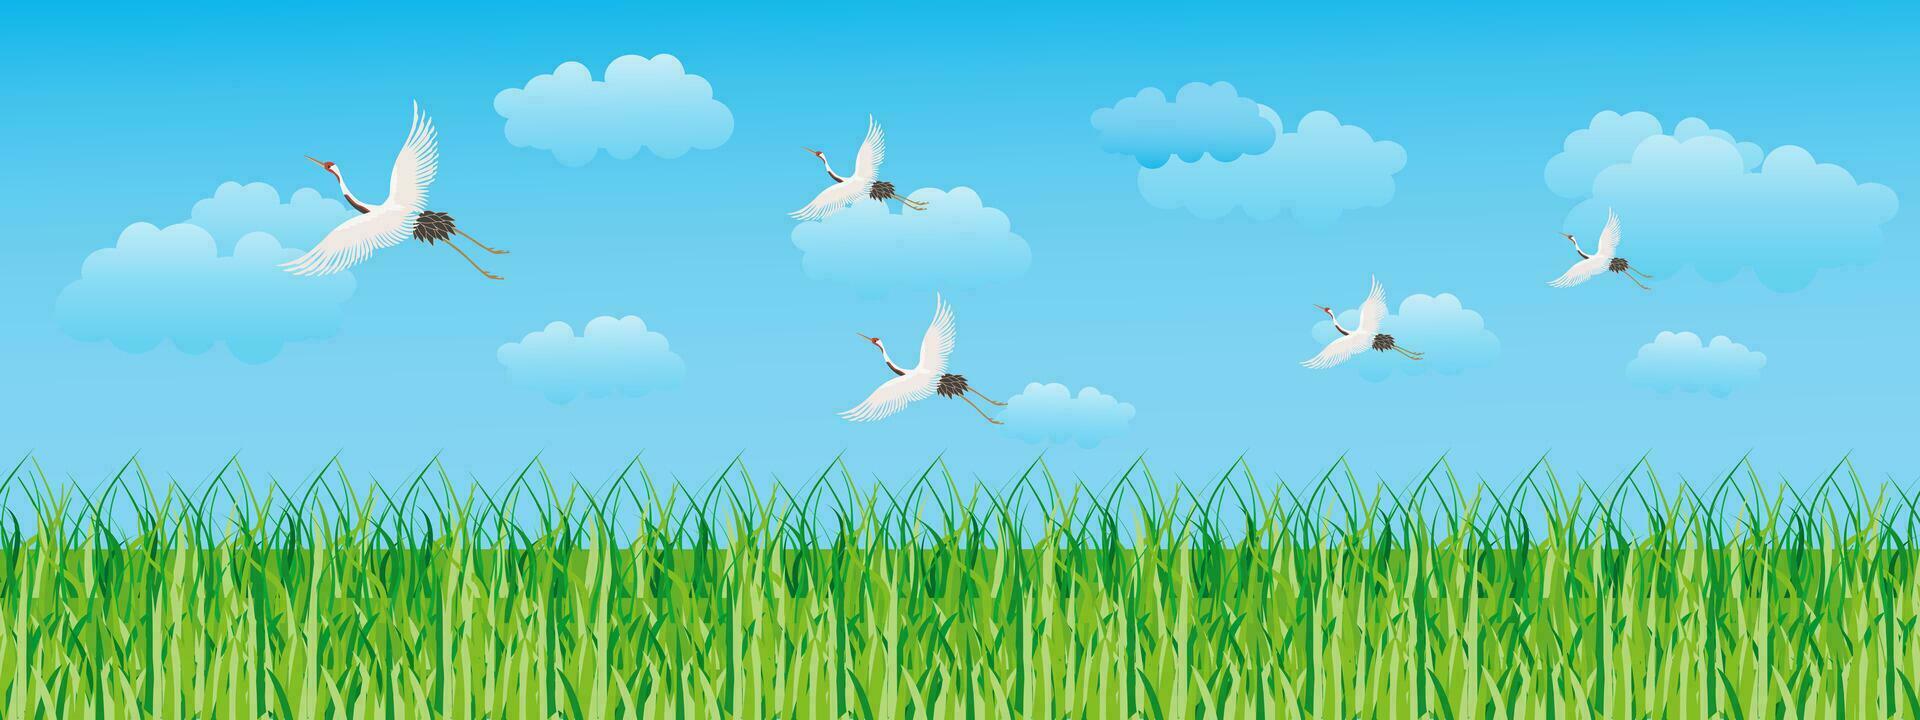 Landscape, green field, cloudy sky and white flying cranes. Seamless border, landscape background, illustration, vector